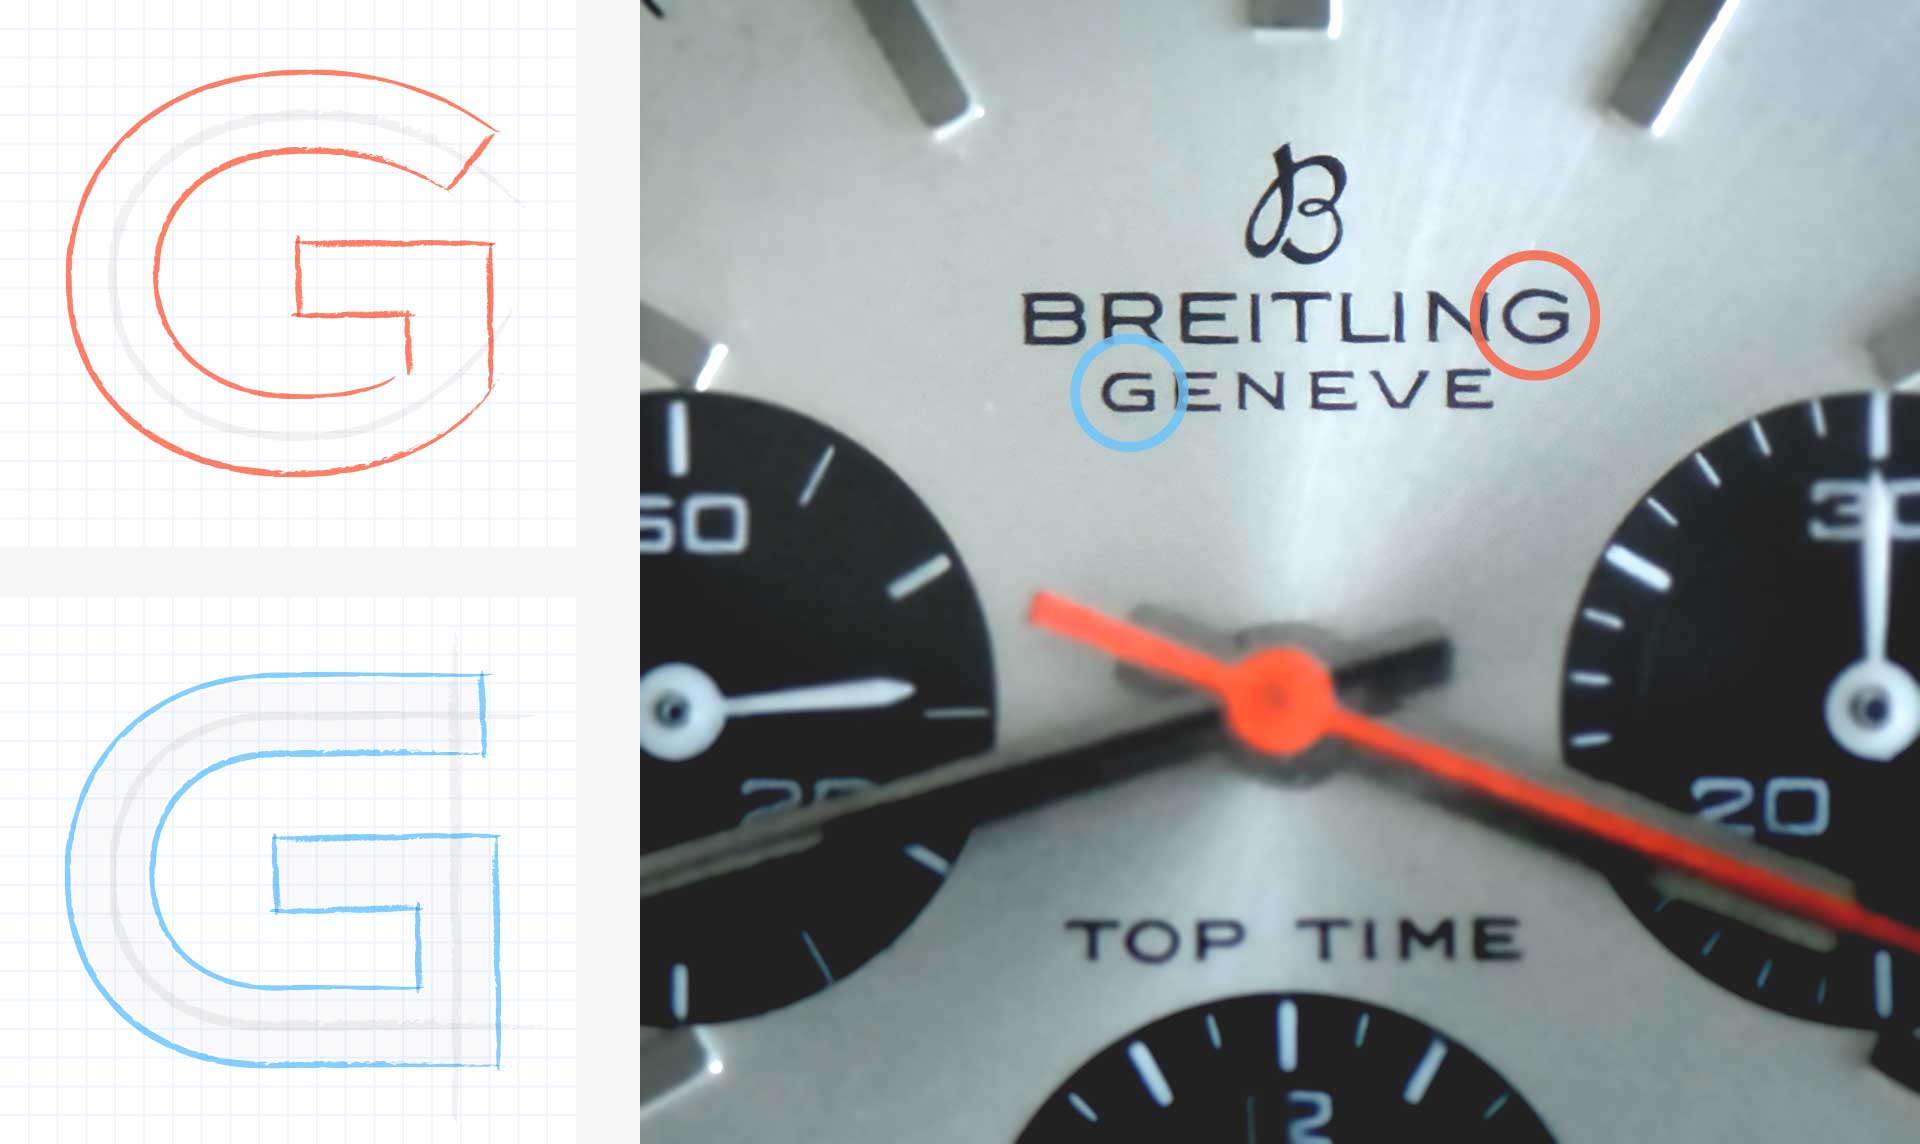 Different morphologies of the letter G on a Breitling Top Time watch dial